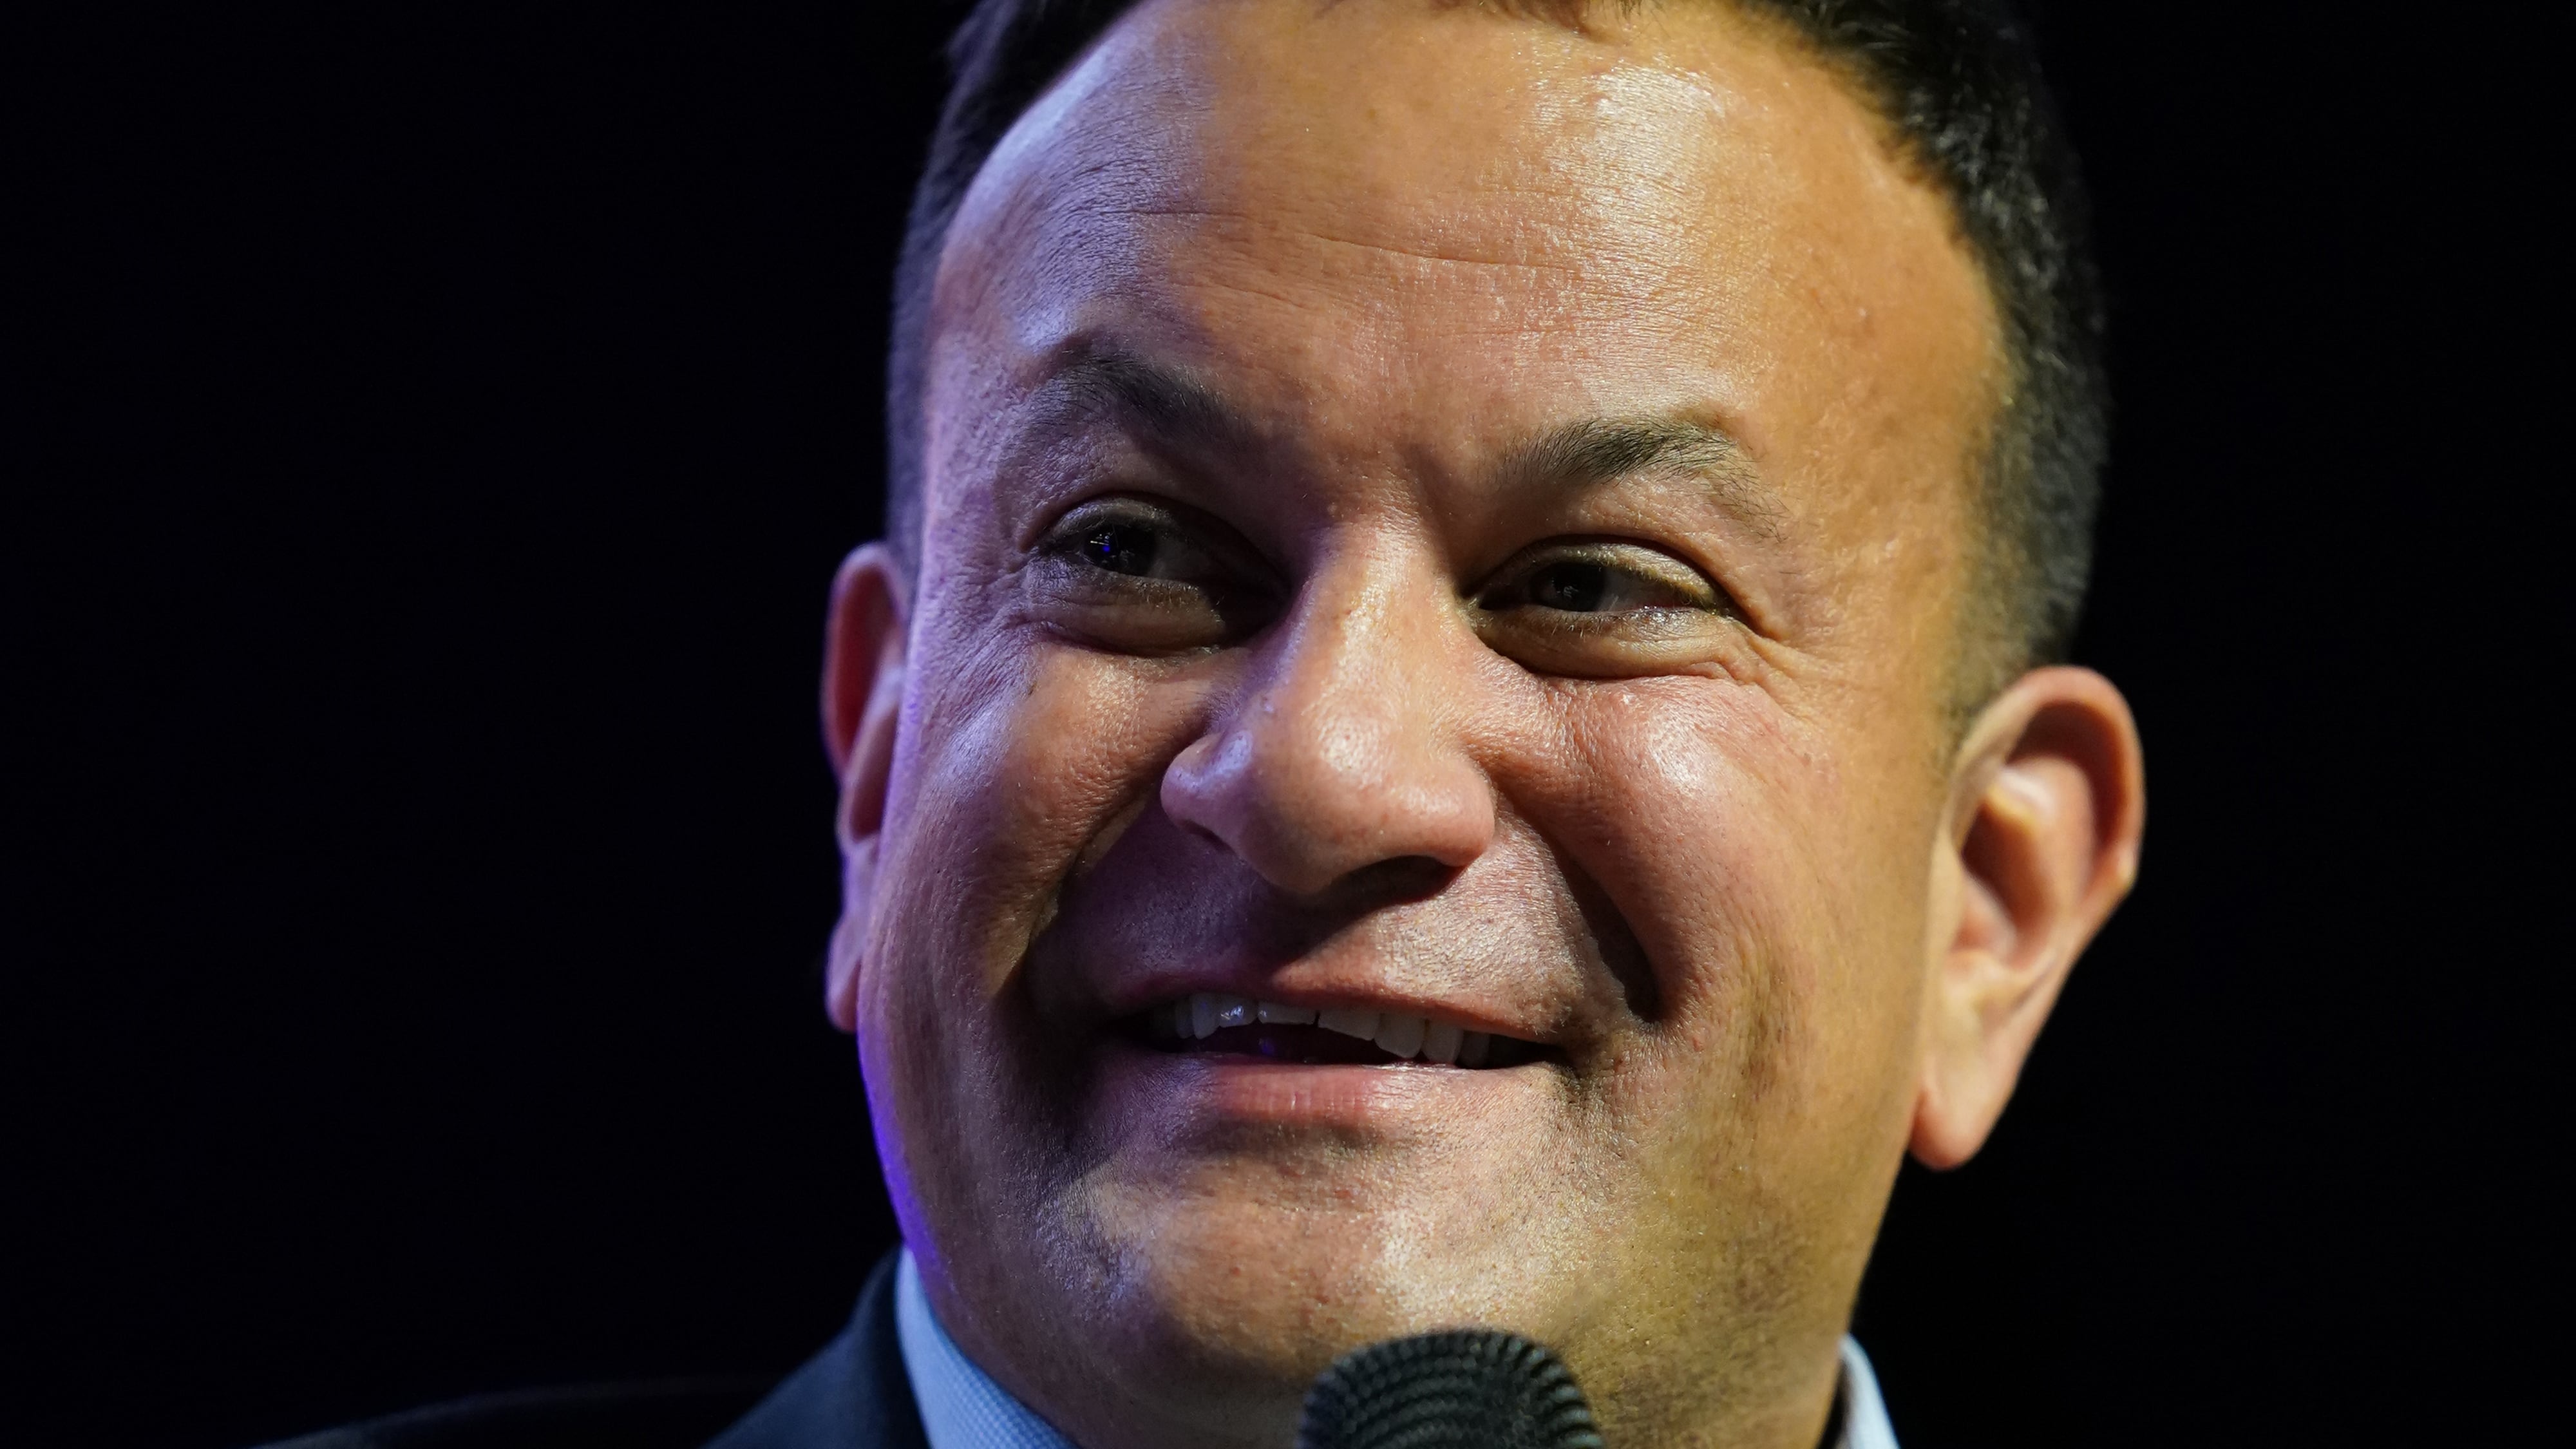 Leo Varadkar spoke about the UK general election at an event in Belfast